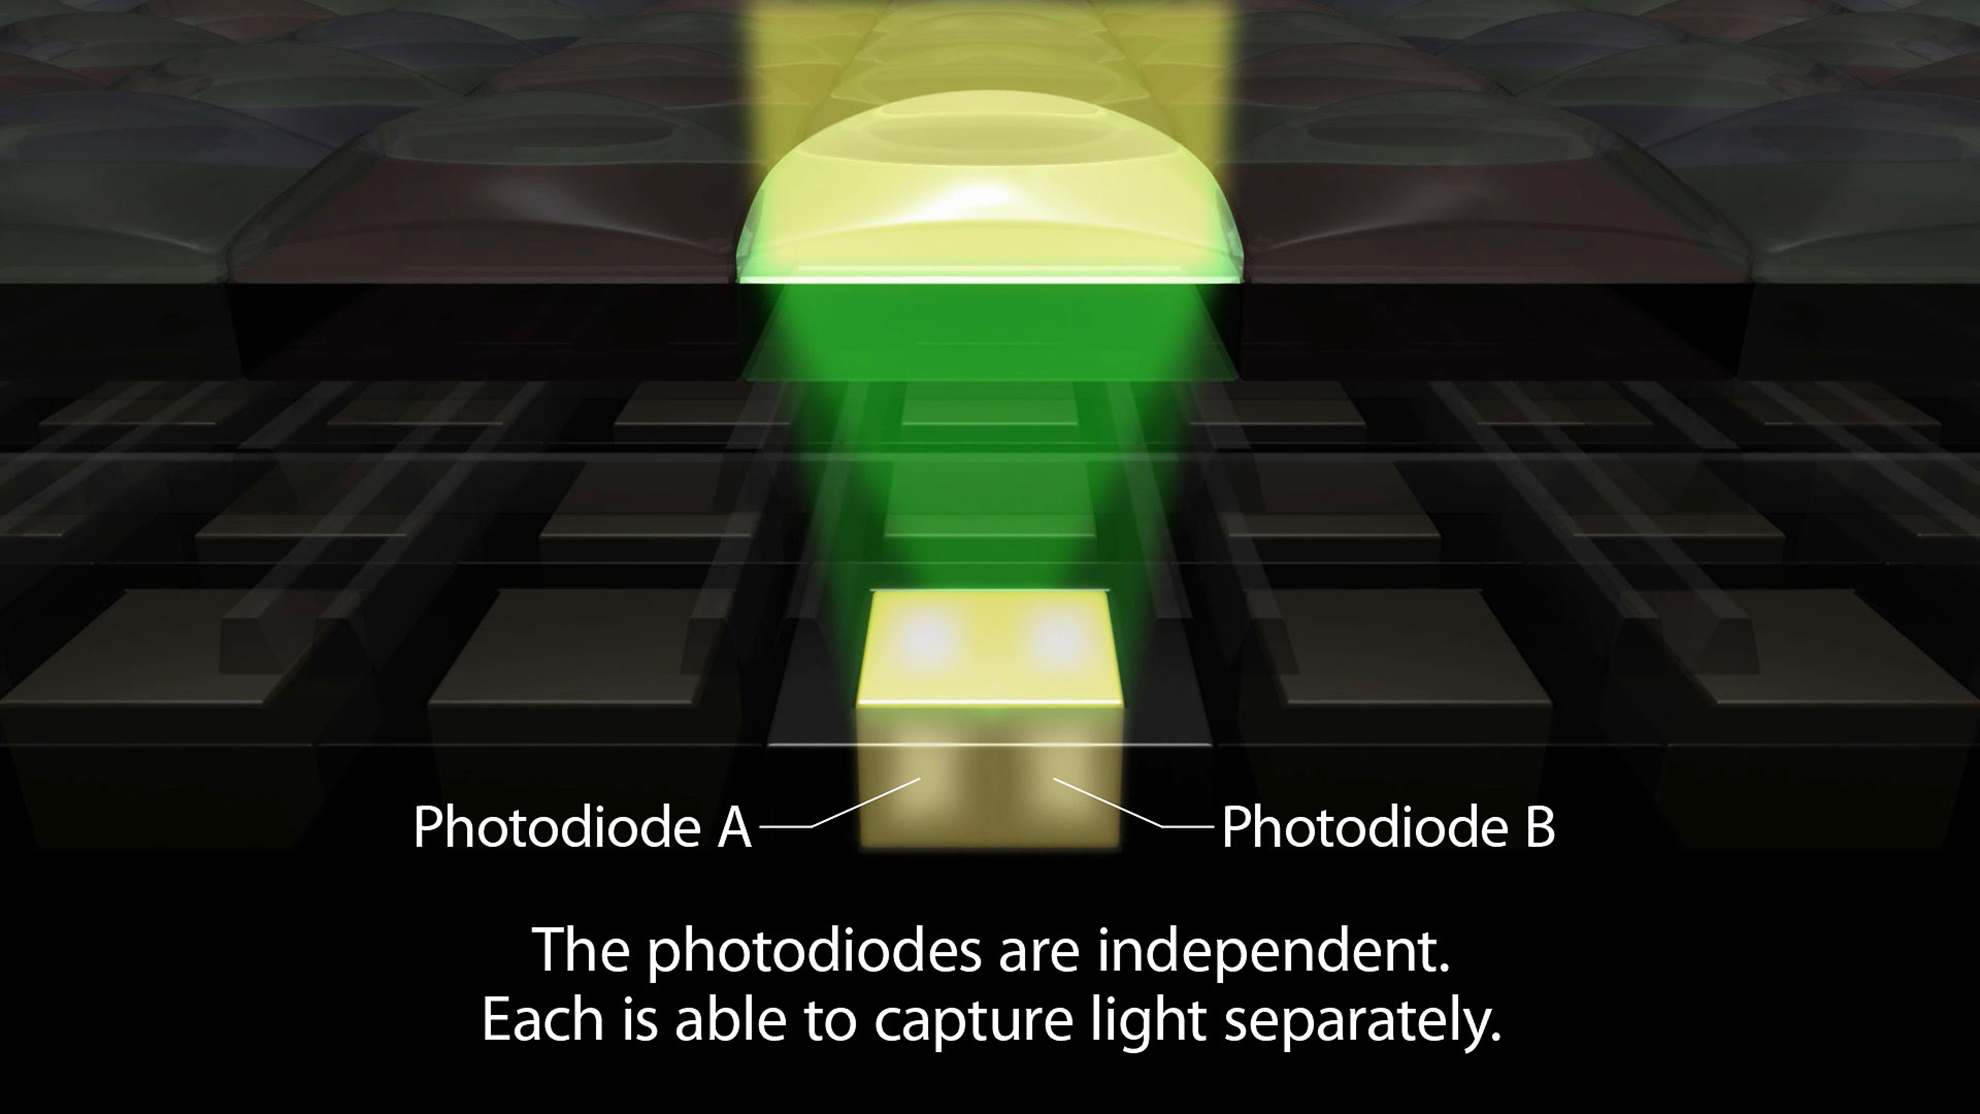 The photodiodes are independent, each is able to capture light separately.